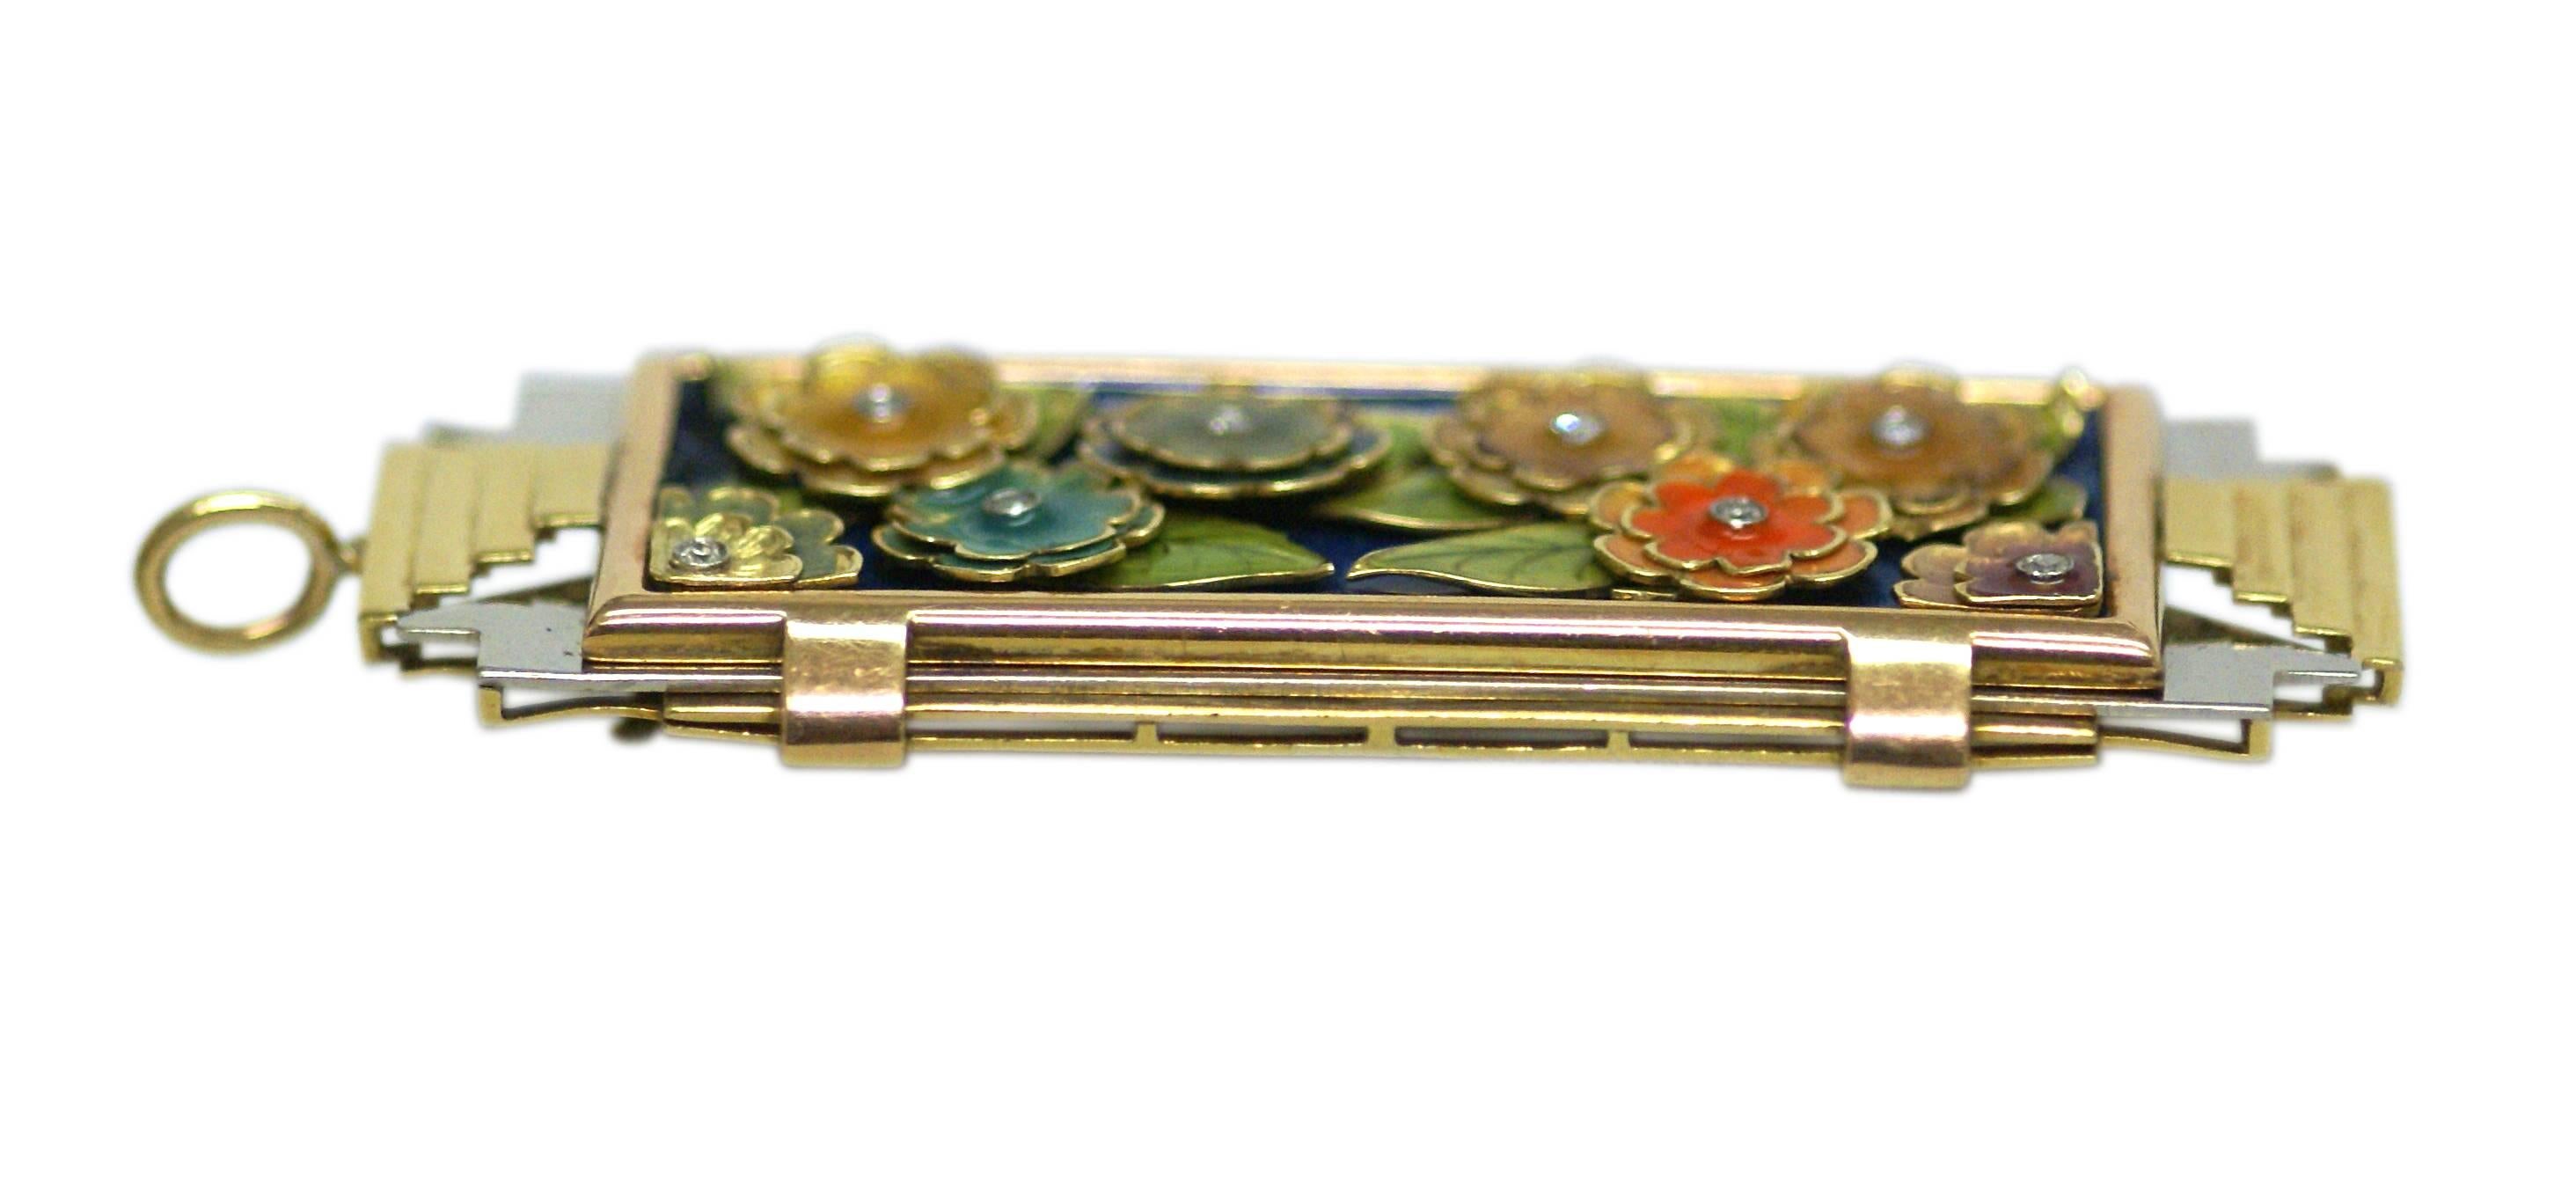 An exquisite Arts & Crafts brooch, combining an early Art Deco geometrical shape with the typical Art Nouveau floral enamel decorations; highlighted by small round cut diamonds. United States, circa 1910.